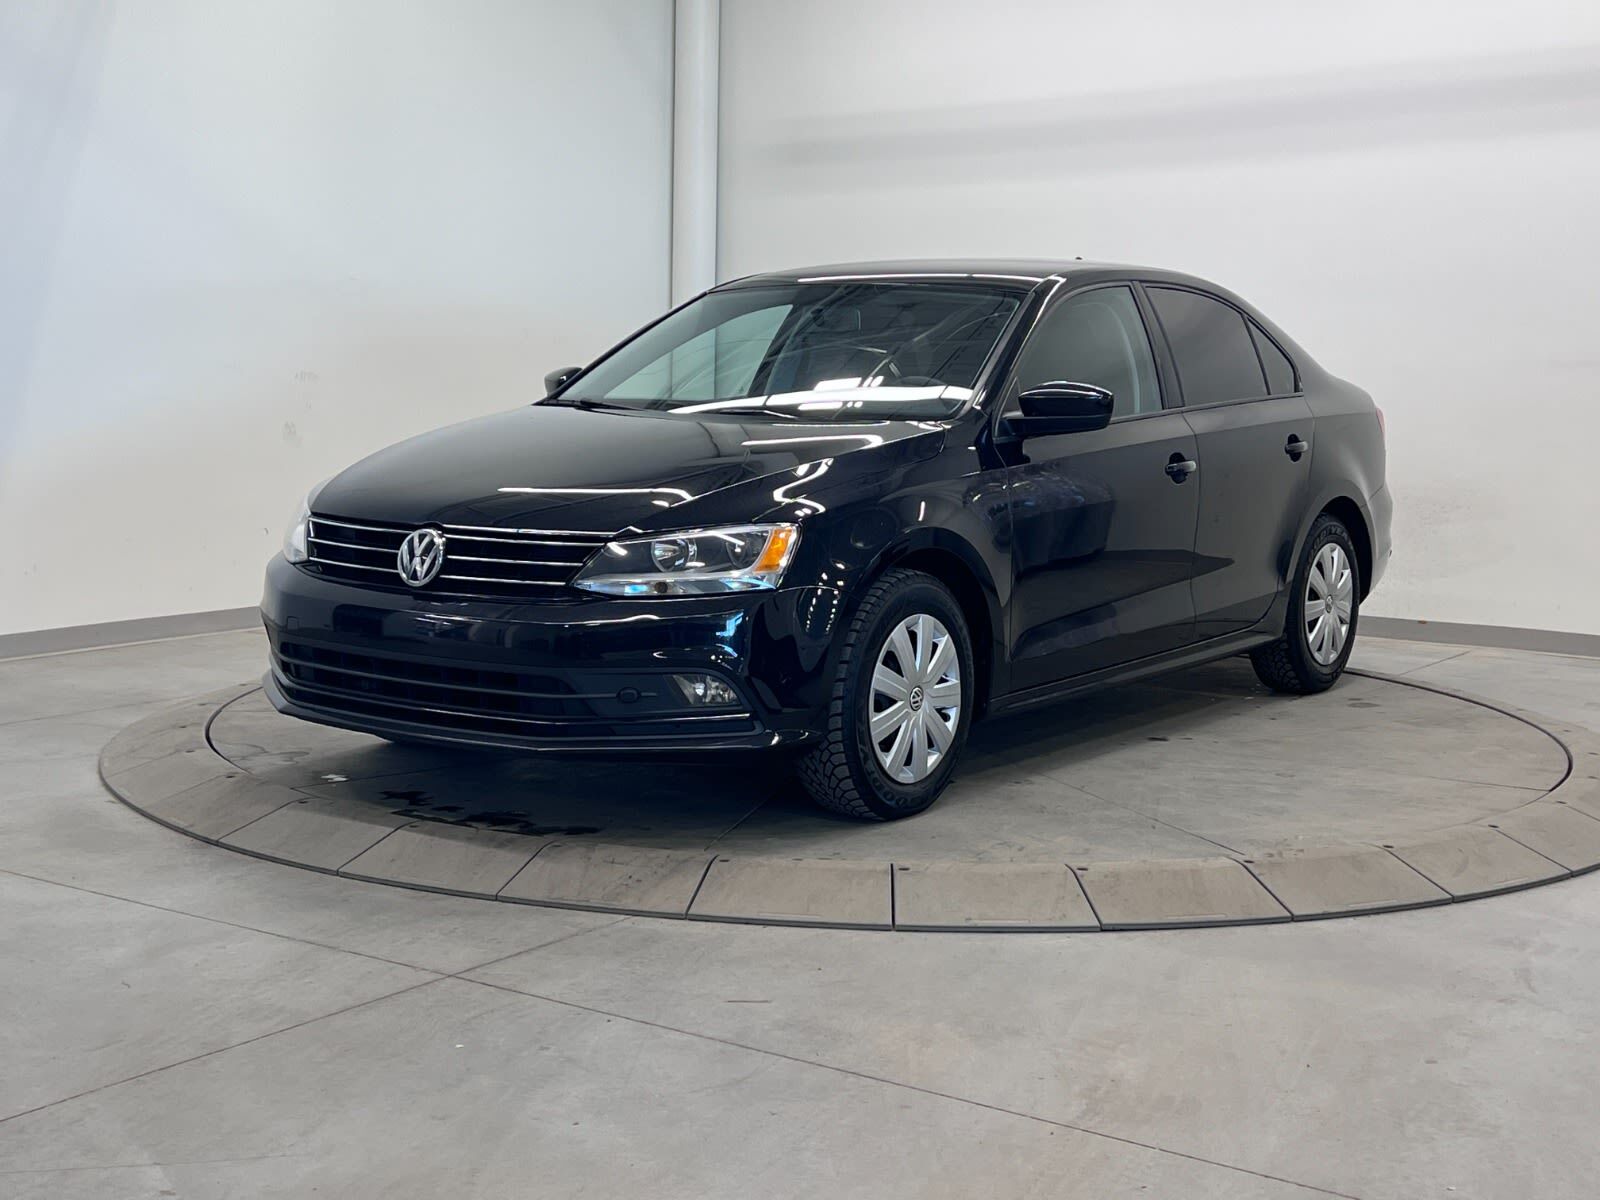 2017 Volkswagen Jetta Sedan | Clean CarFax, Local Vehicle, Fully Inspected, Re